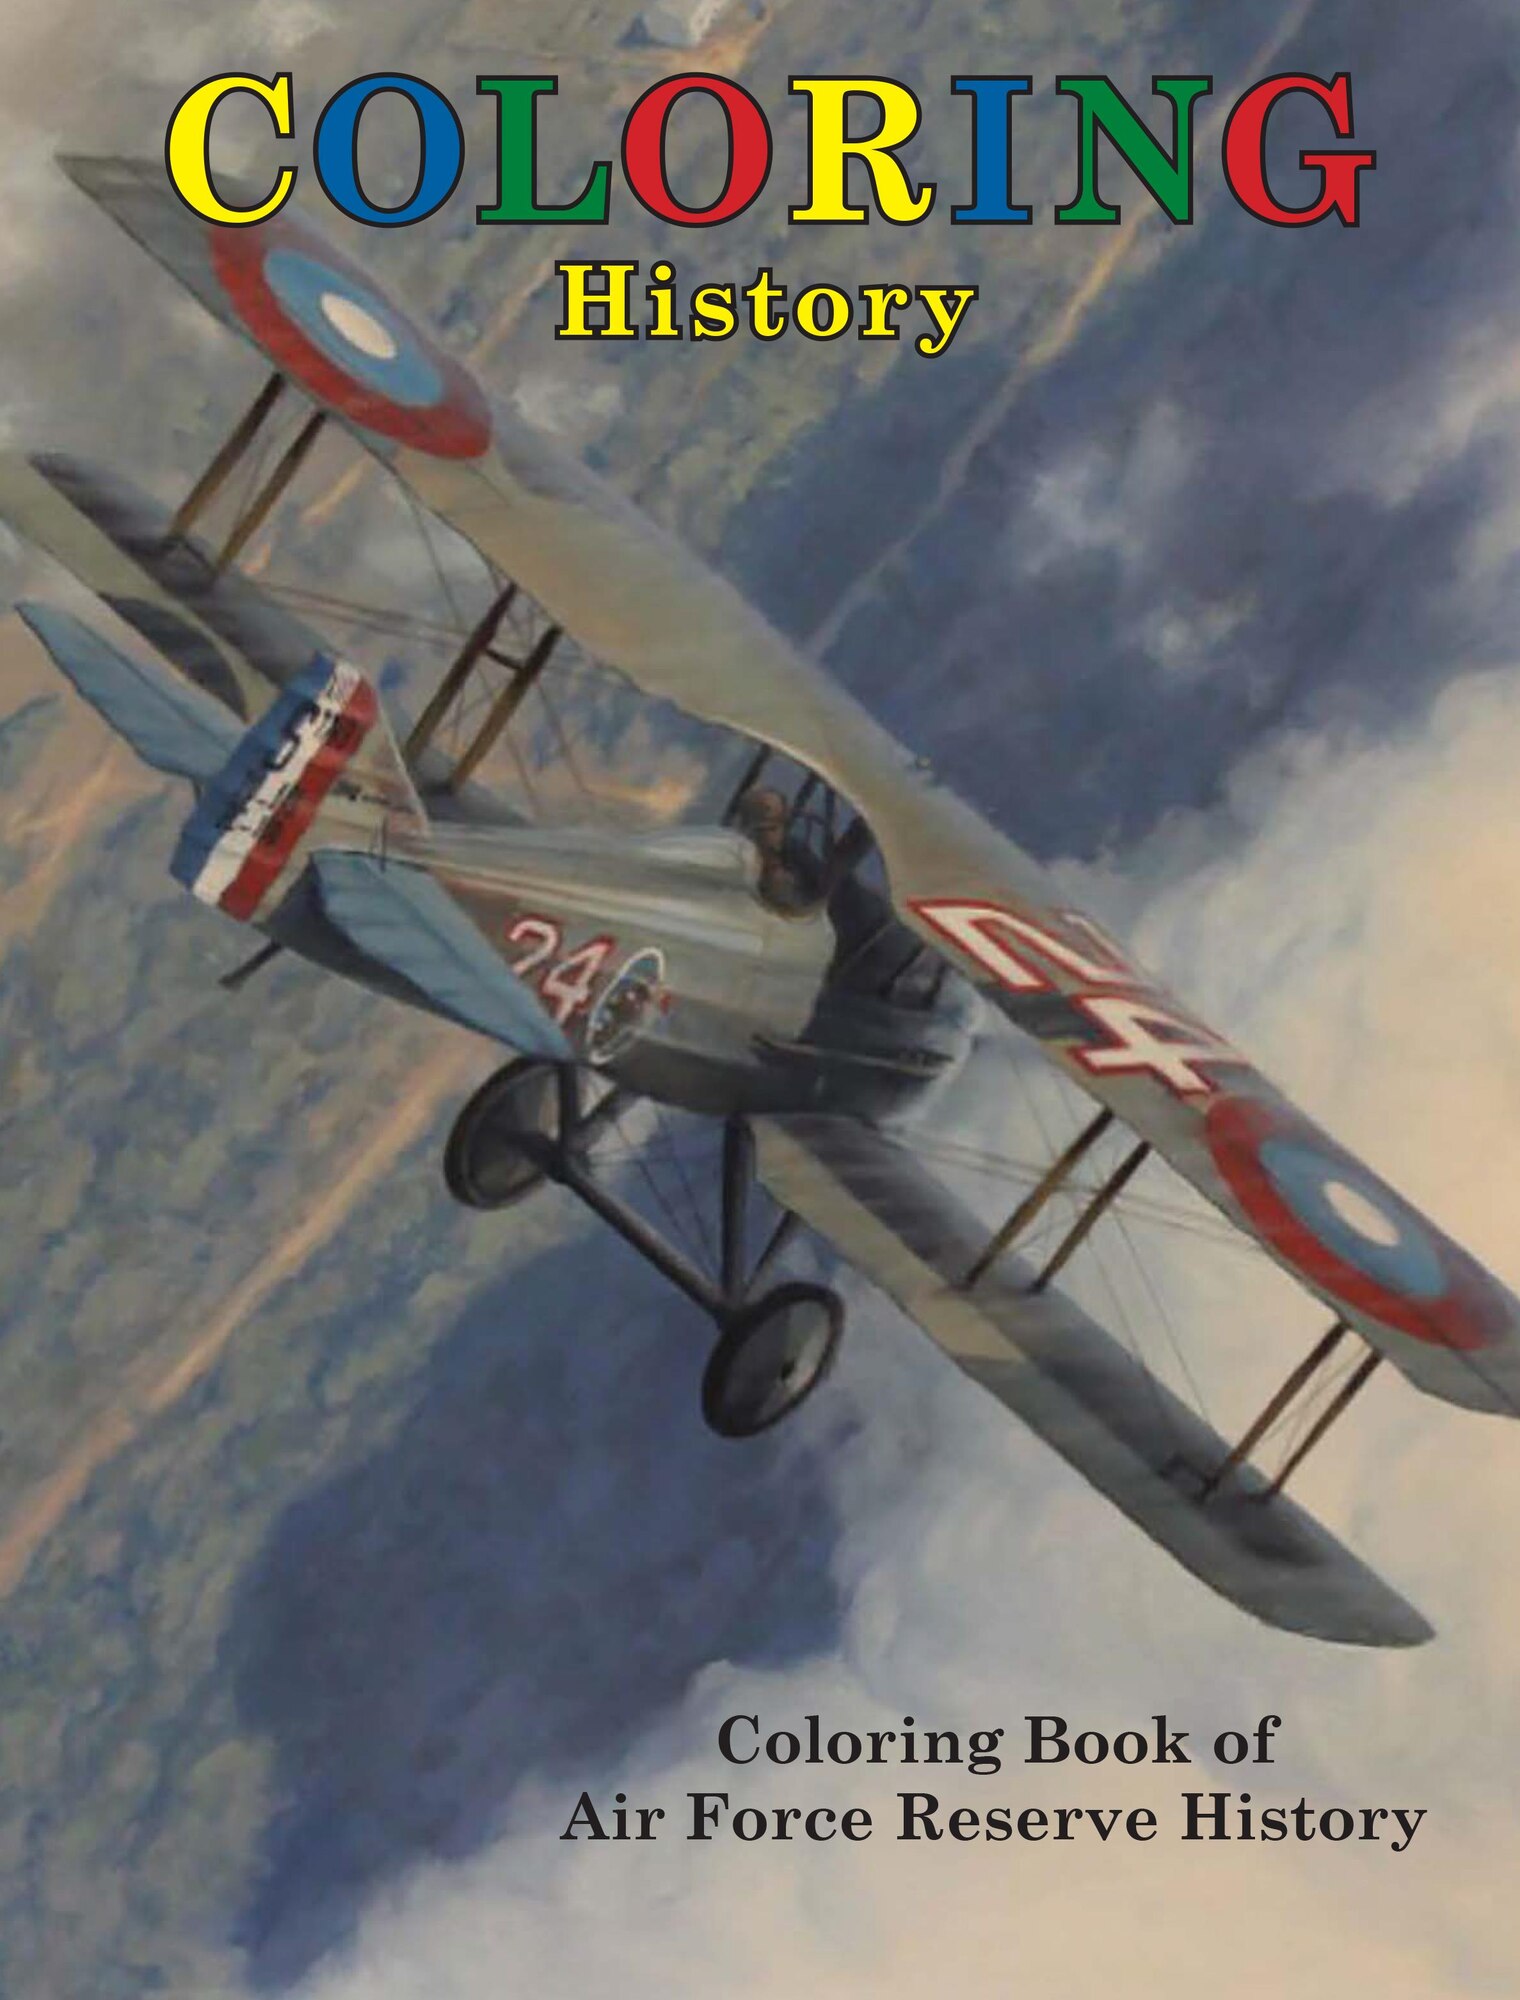 The AFRC History coloring book, which includes original artwork by 507th Air Refueling Wing Reservist Senior Master Sgt. Darby Perrin and AFRC historian Maj. Warren Neary, is the first of its kind. 